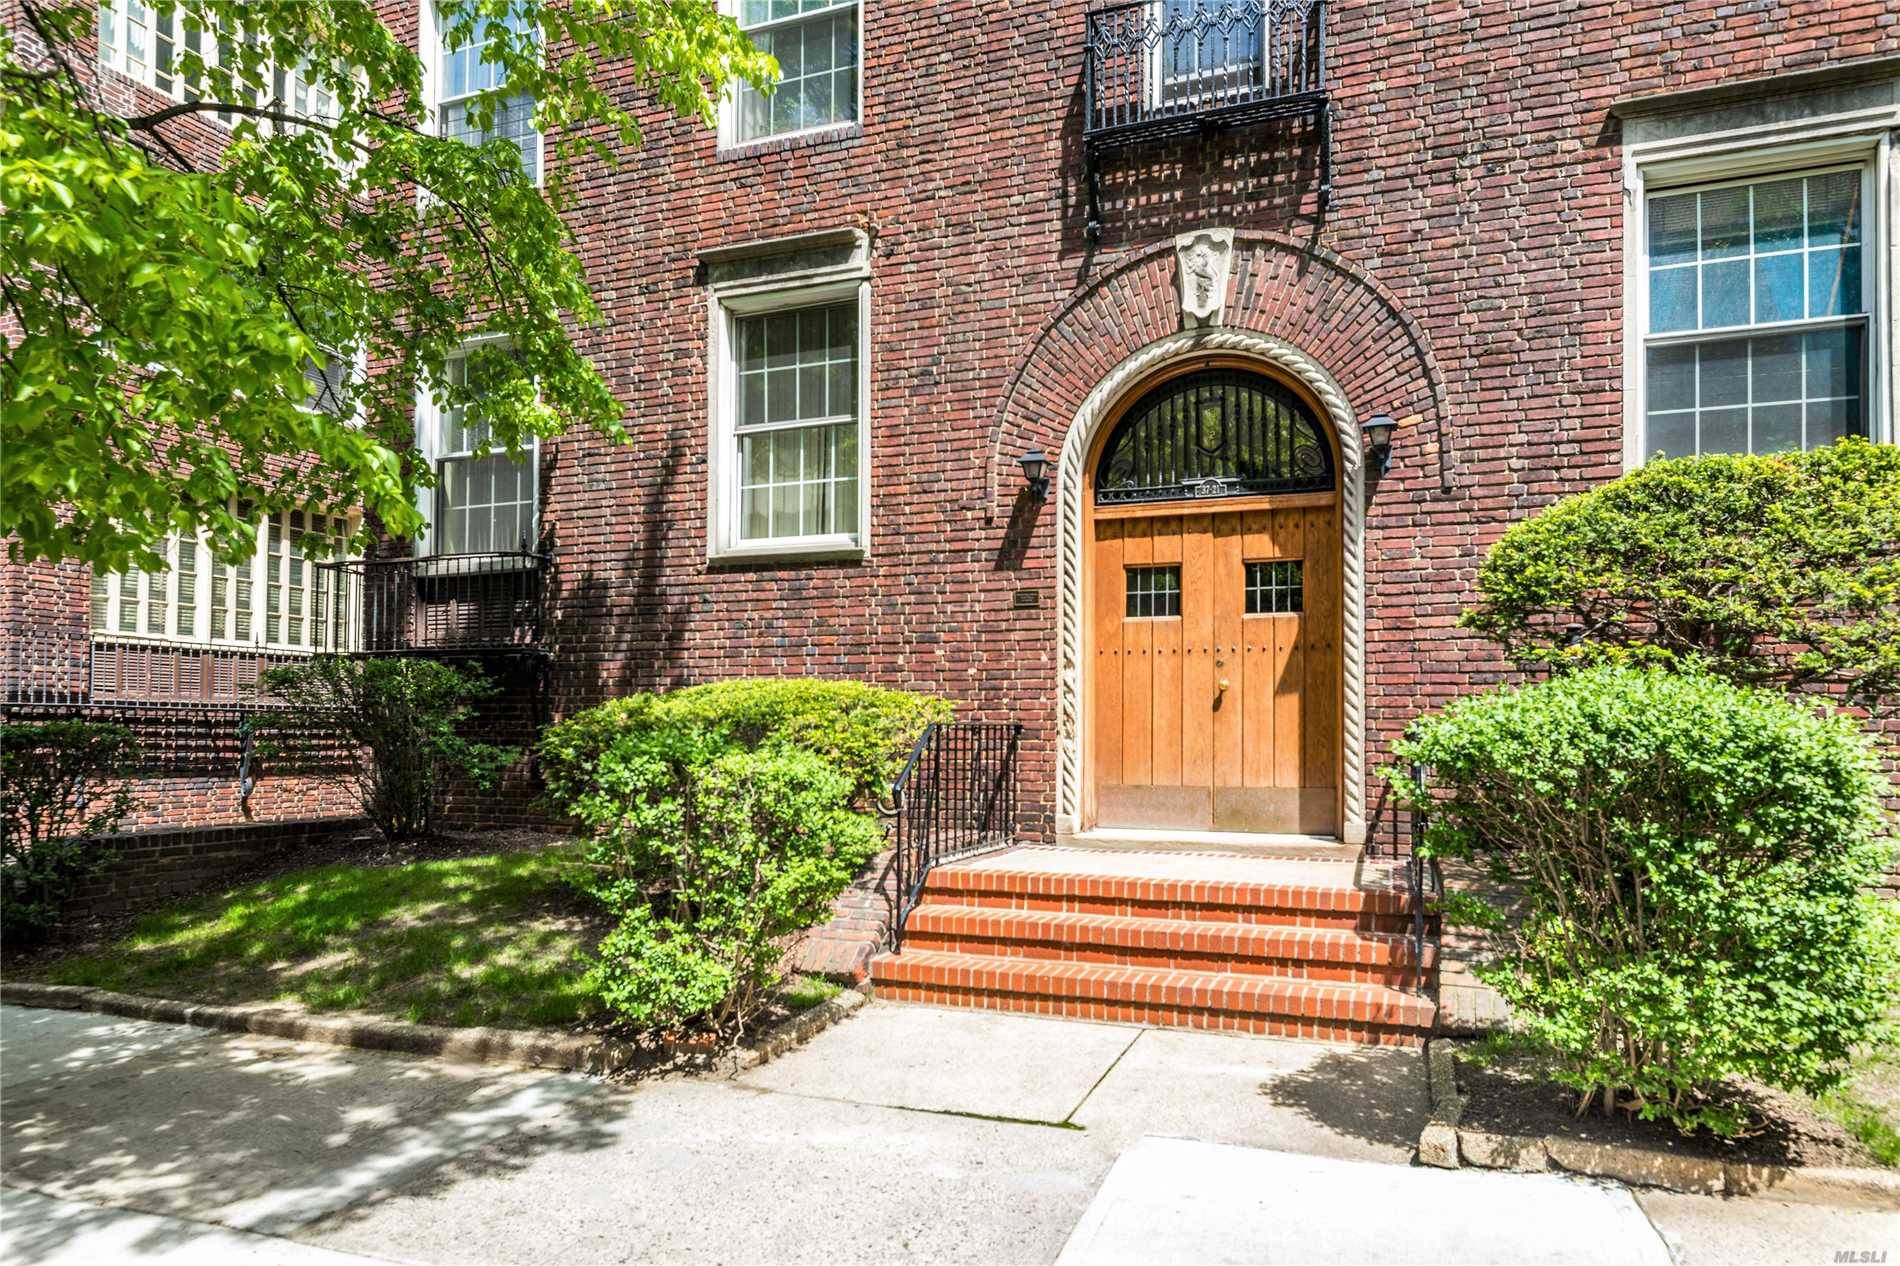 Wonderful 2 Bedroom Co-Op Resting On The First Floor Of Linden Court Complex, And Located In The Jackson Heights Historic District.